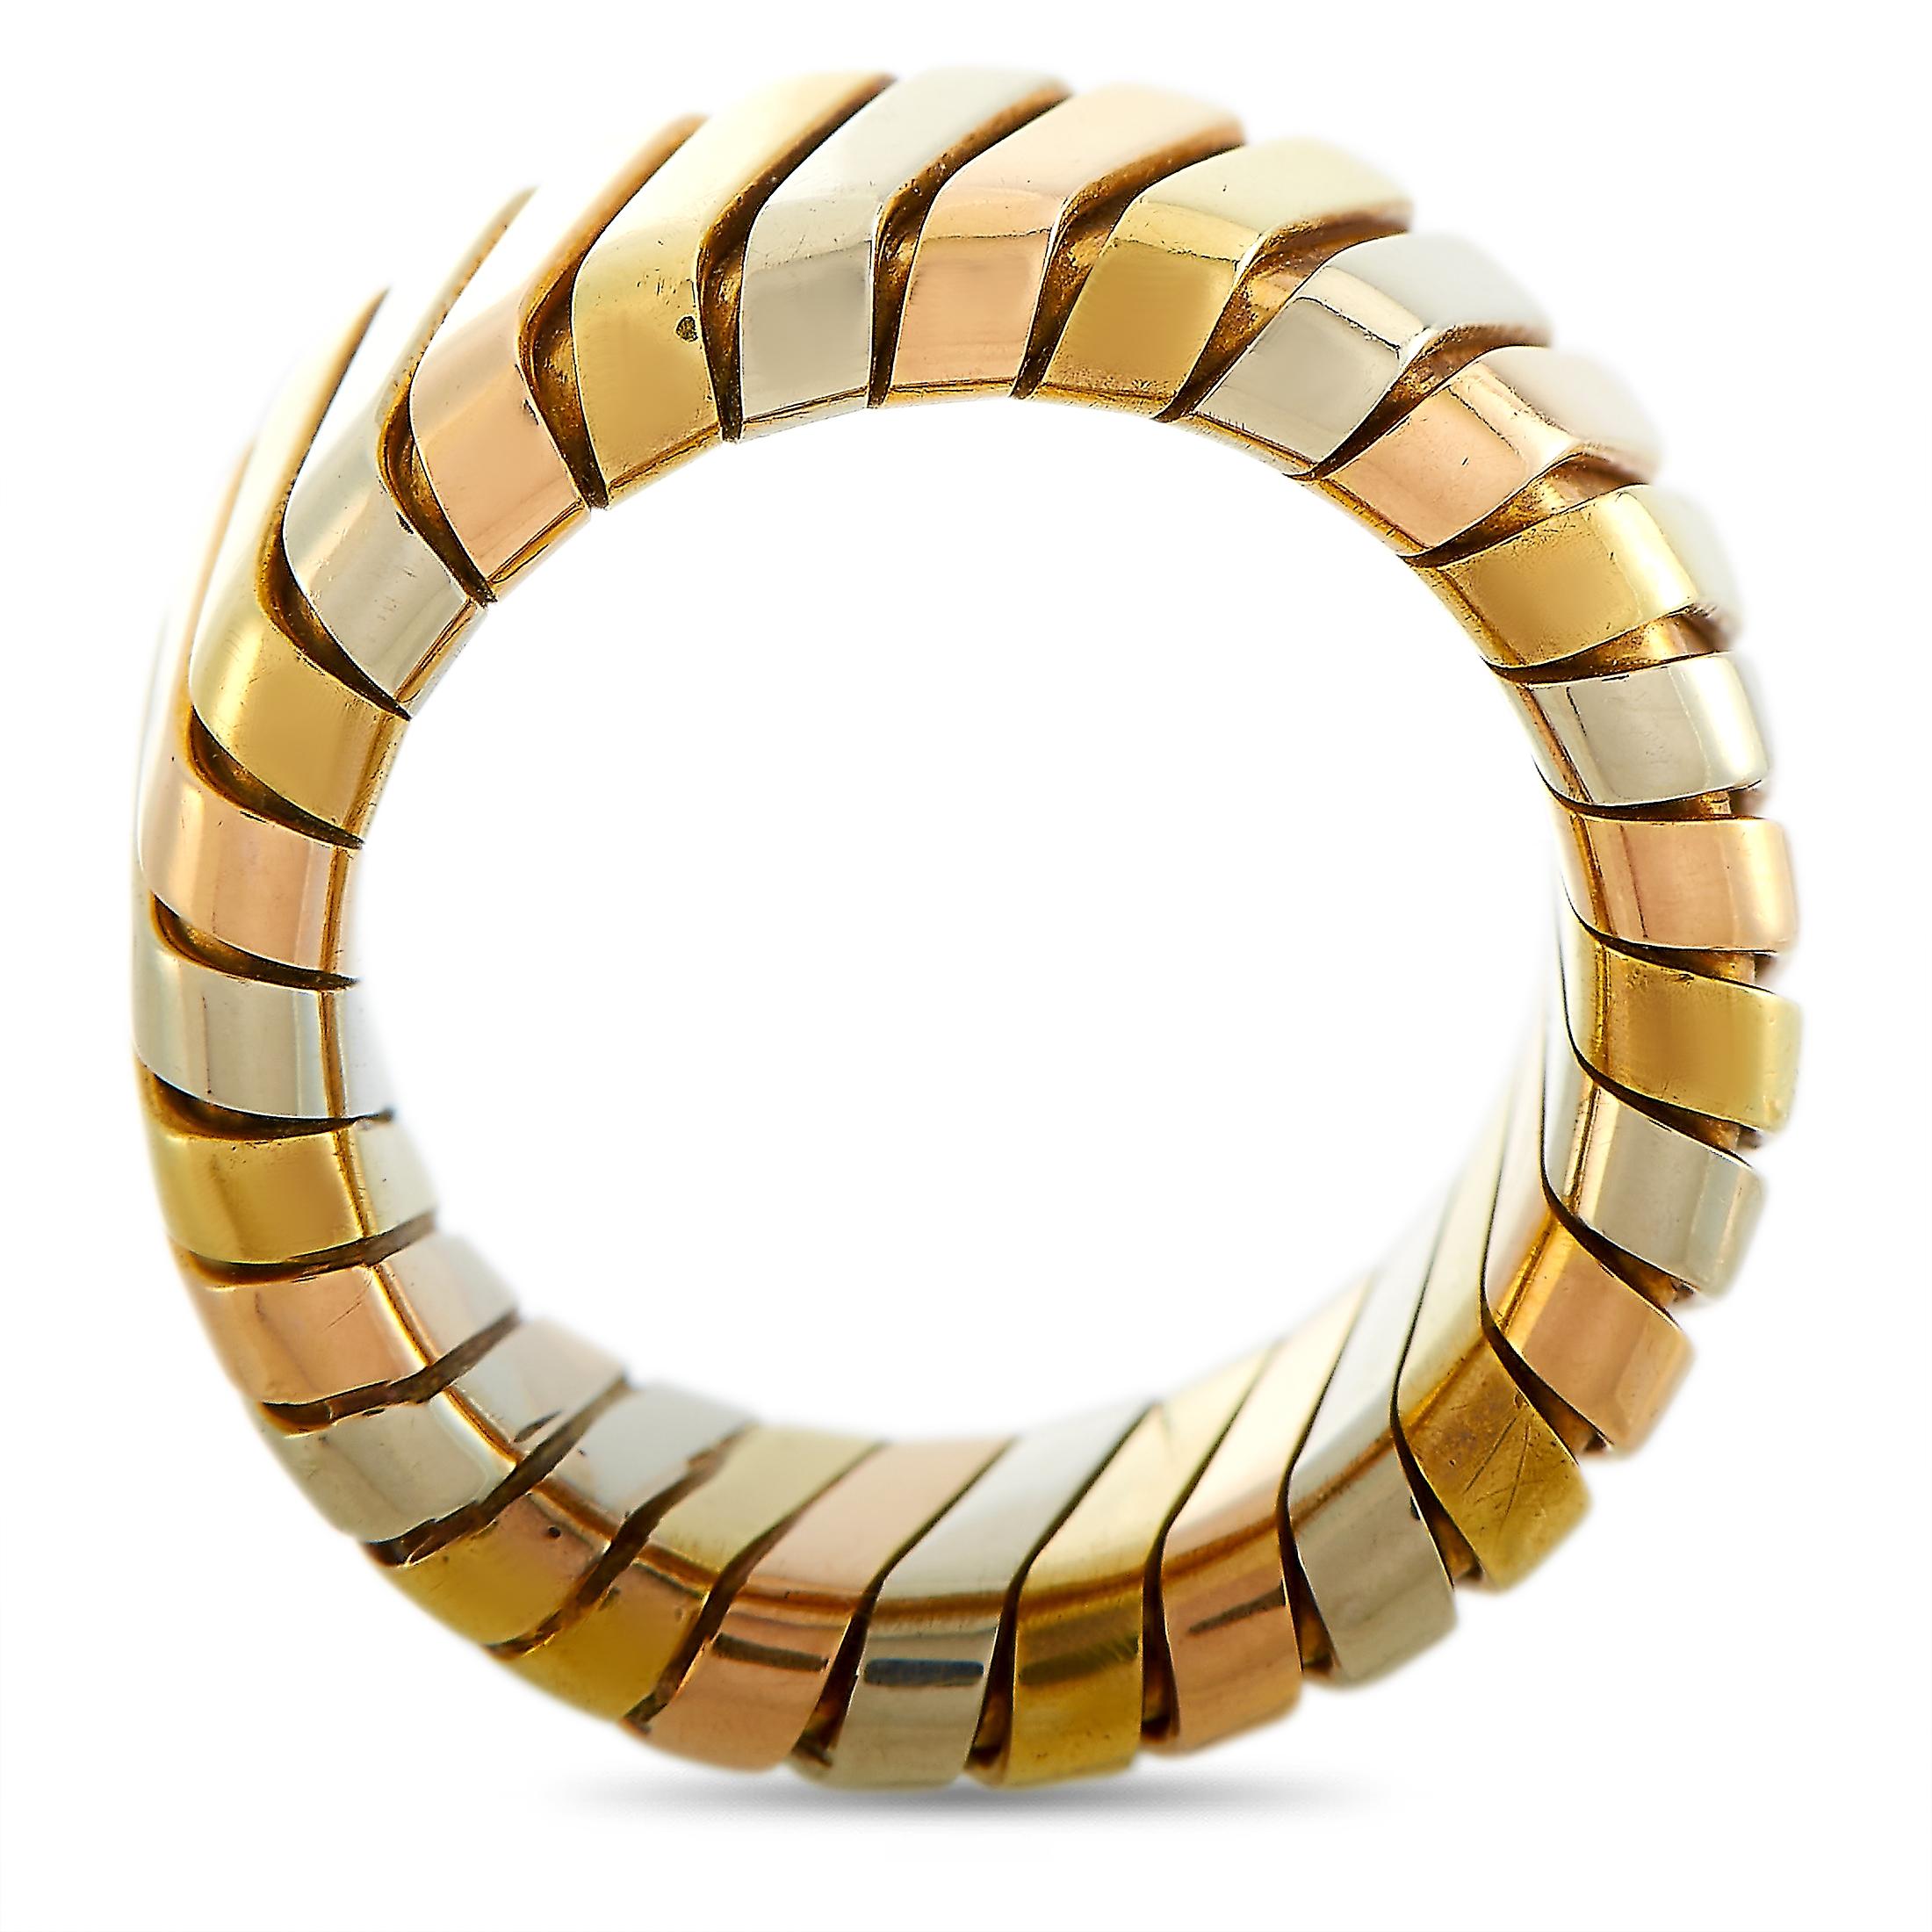 This Bvlgari tubogas ring is made out of 18K white, yellow and rose gold and weighs 13 grams, boasting band thickness of 10 mm.
 
 The ring is offered in estate condition and includes the manufacturer’s box.
Ring Size: 5.0